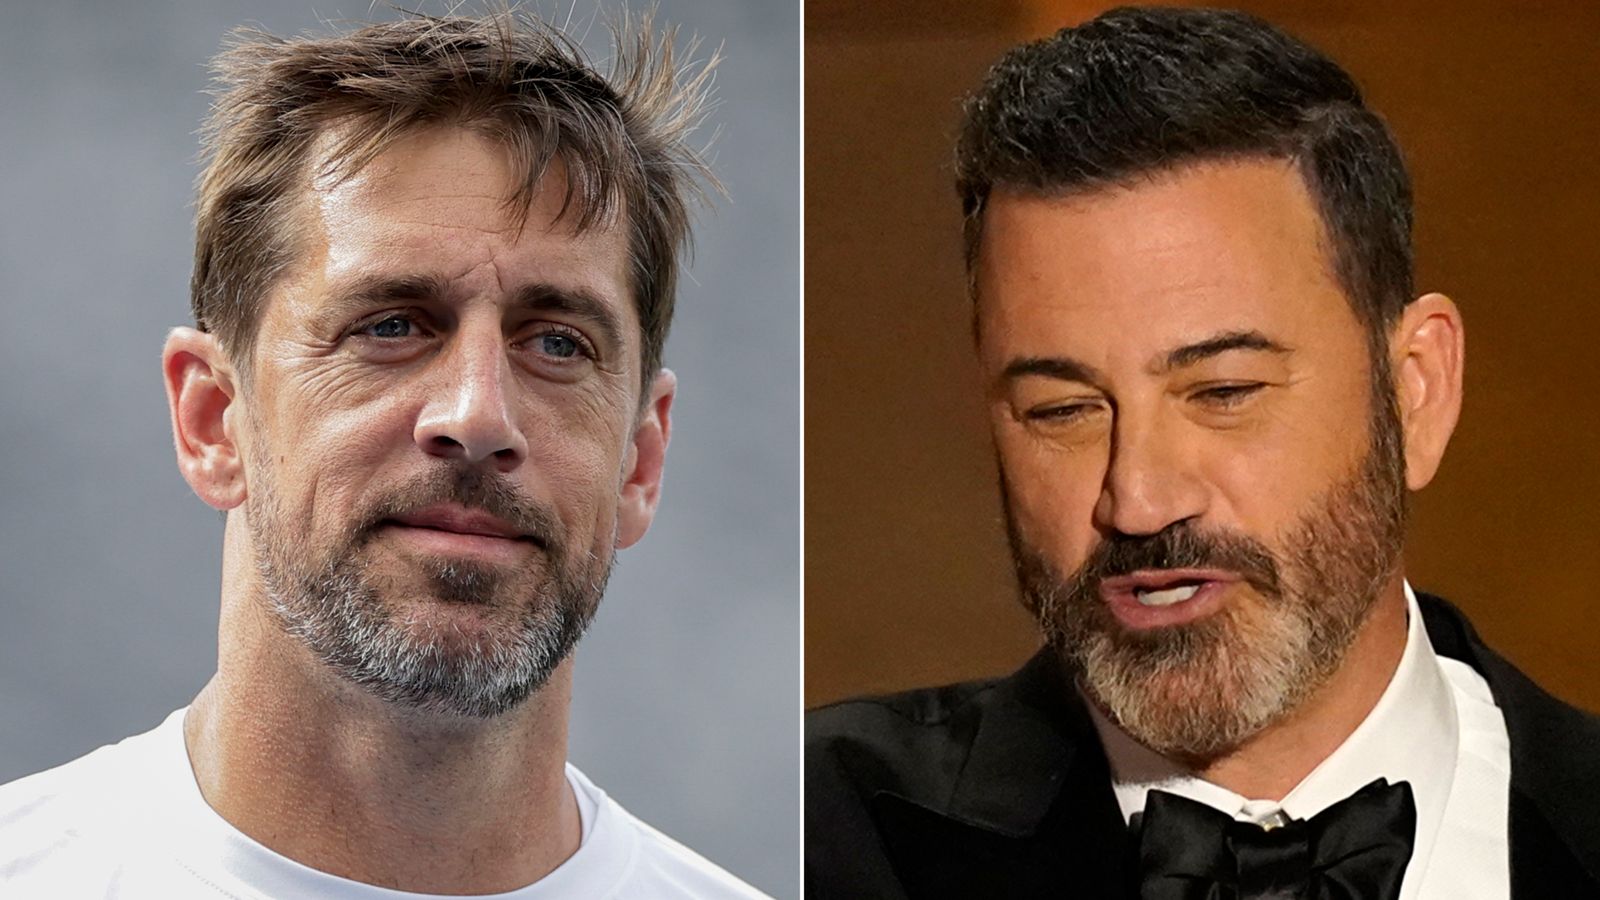 Jimmy Kimmel threatens legal action against NFL star over suggested Jeffrey Epstein links